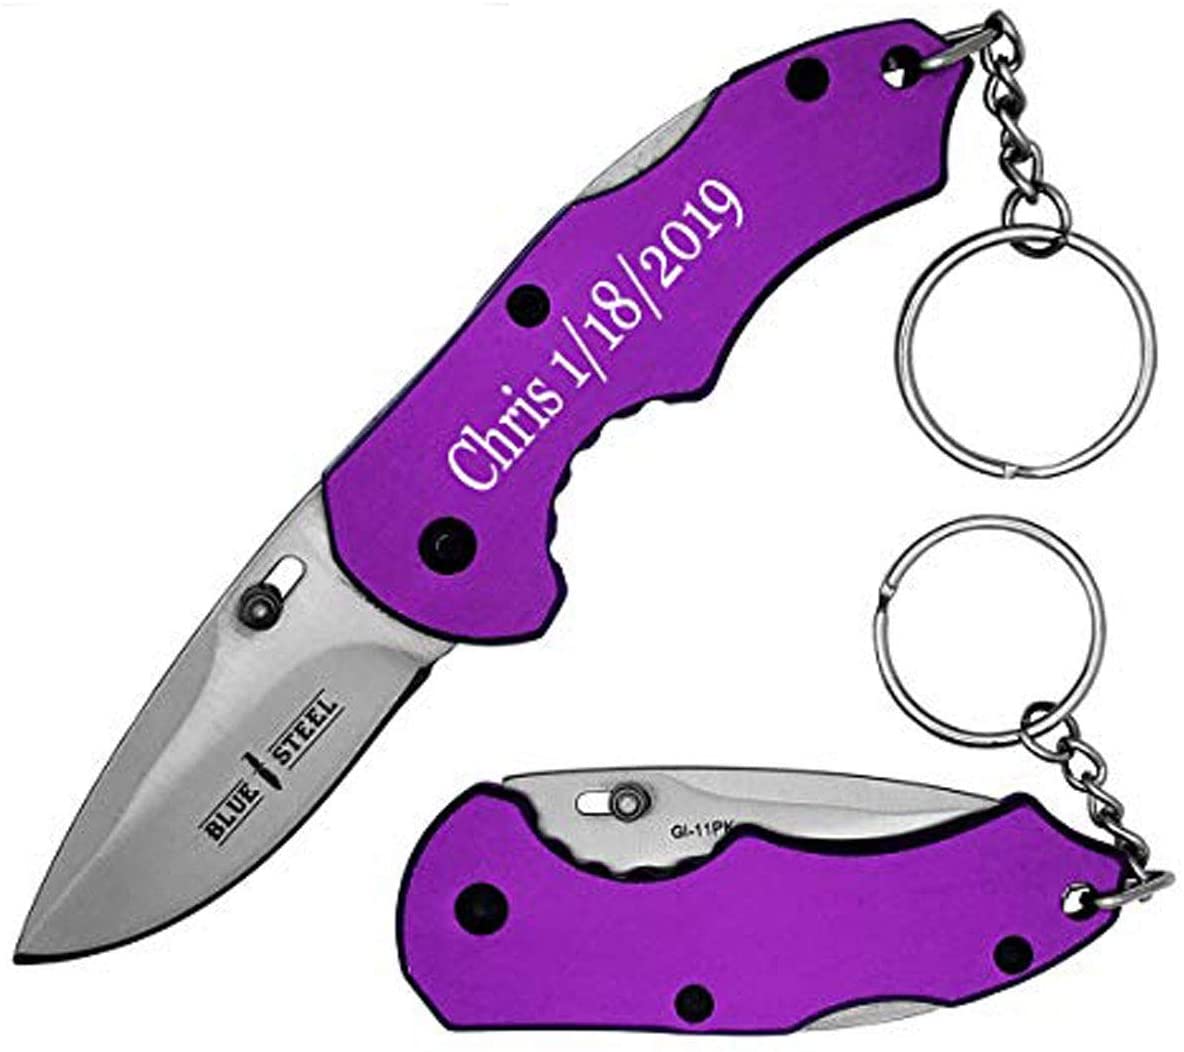 GIFTS INFINITY Spring Assisted Folding Knife with Keychain– Fine Edge Blade with Purple Stainless Steel Handle